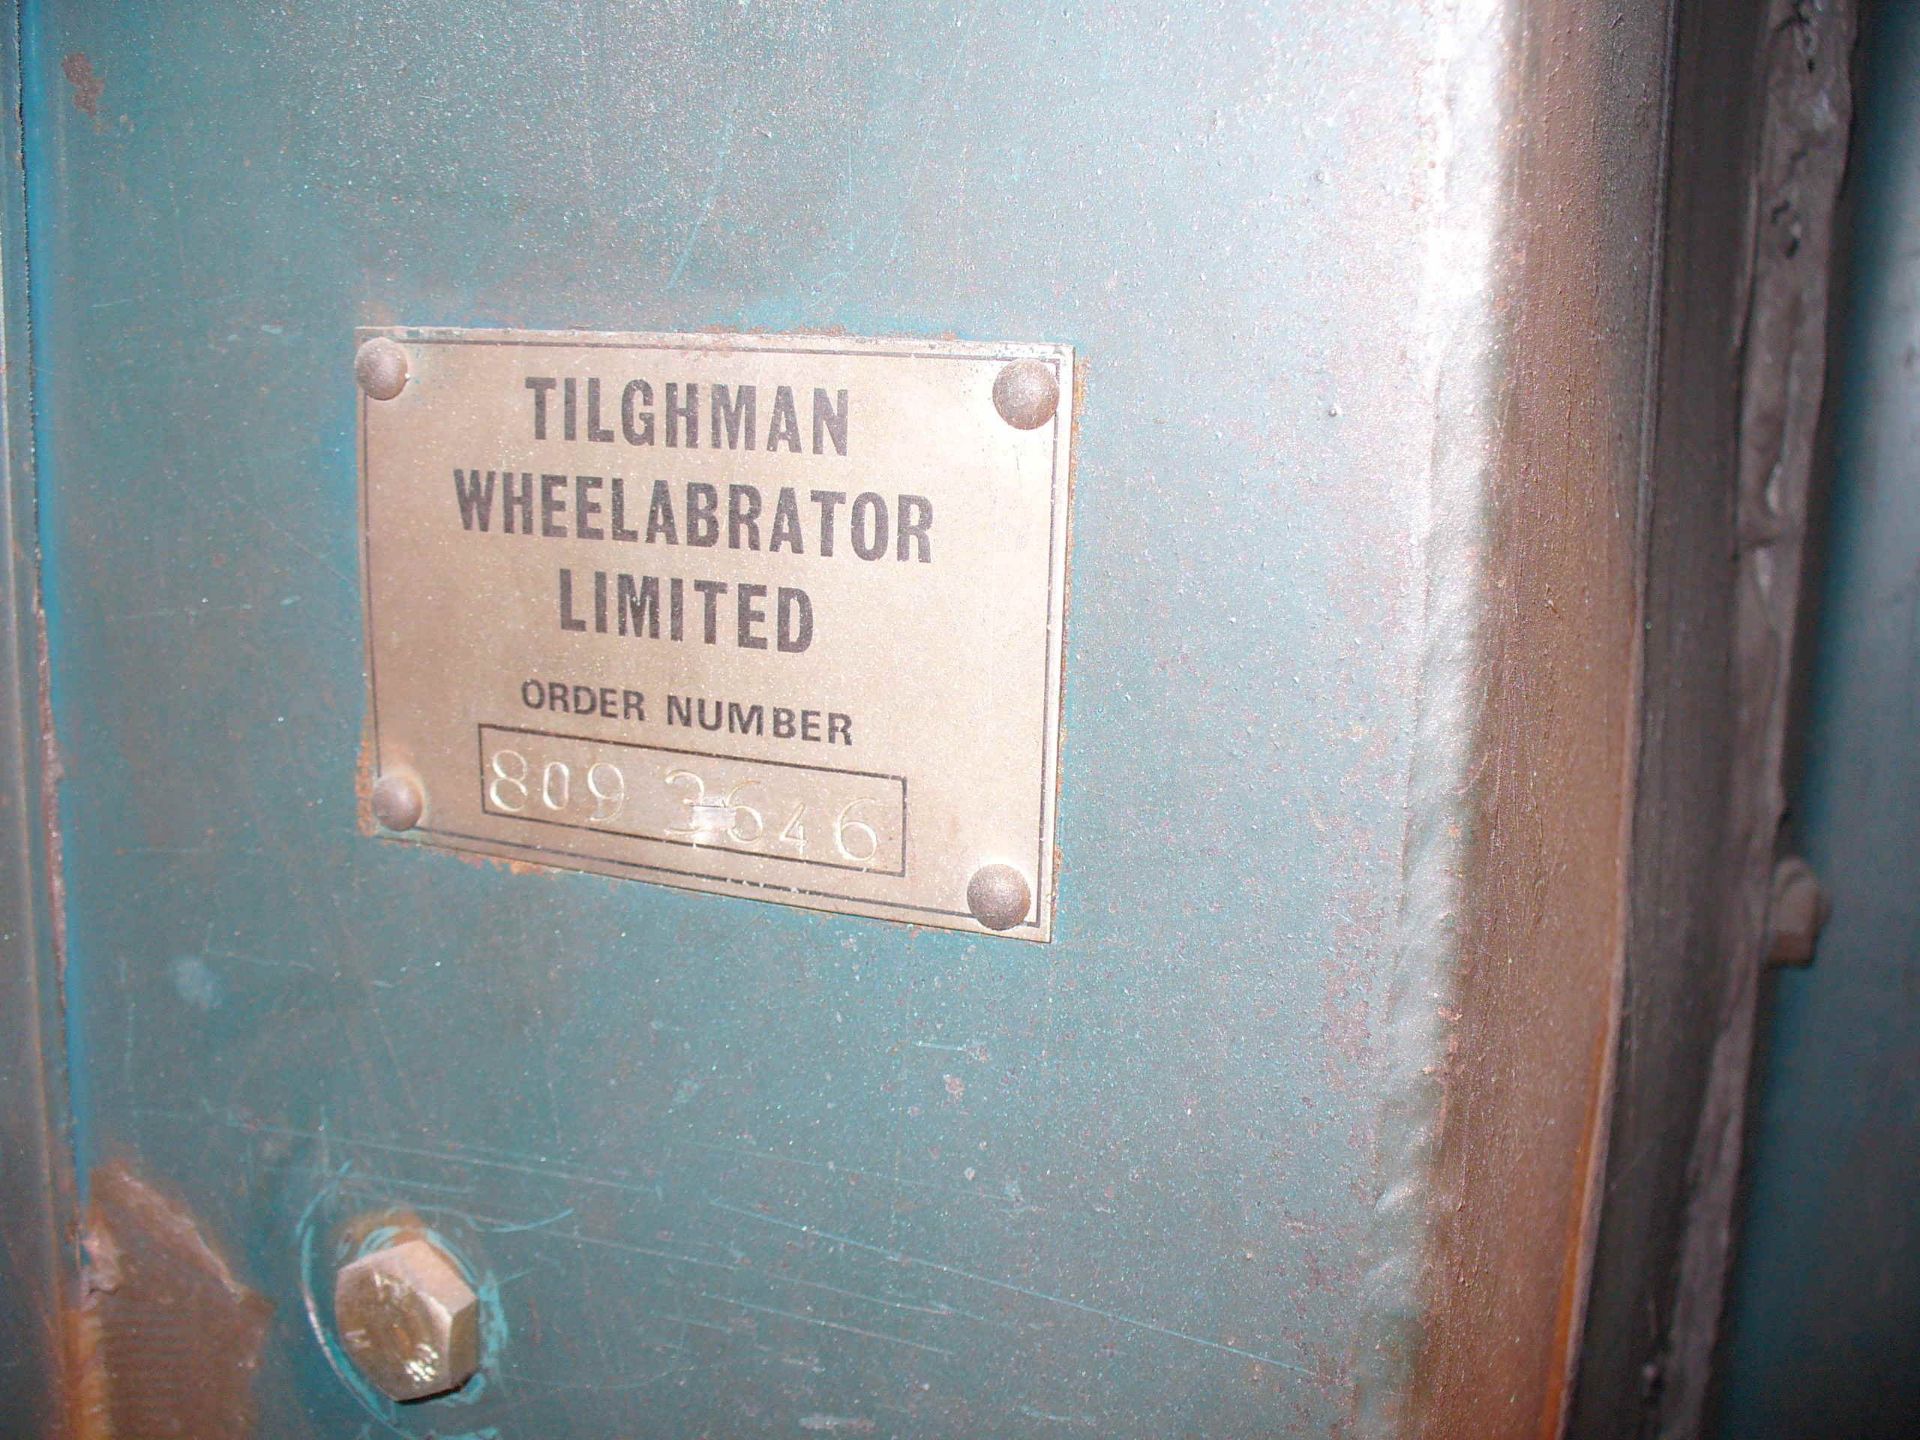 Tighlman wheelabrator SHOT BLASTER, serial no 809 3642, approx 2m diameter table,shot recovery plant - Image 5 of 7